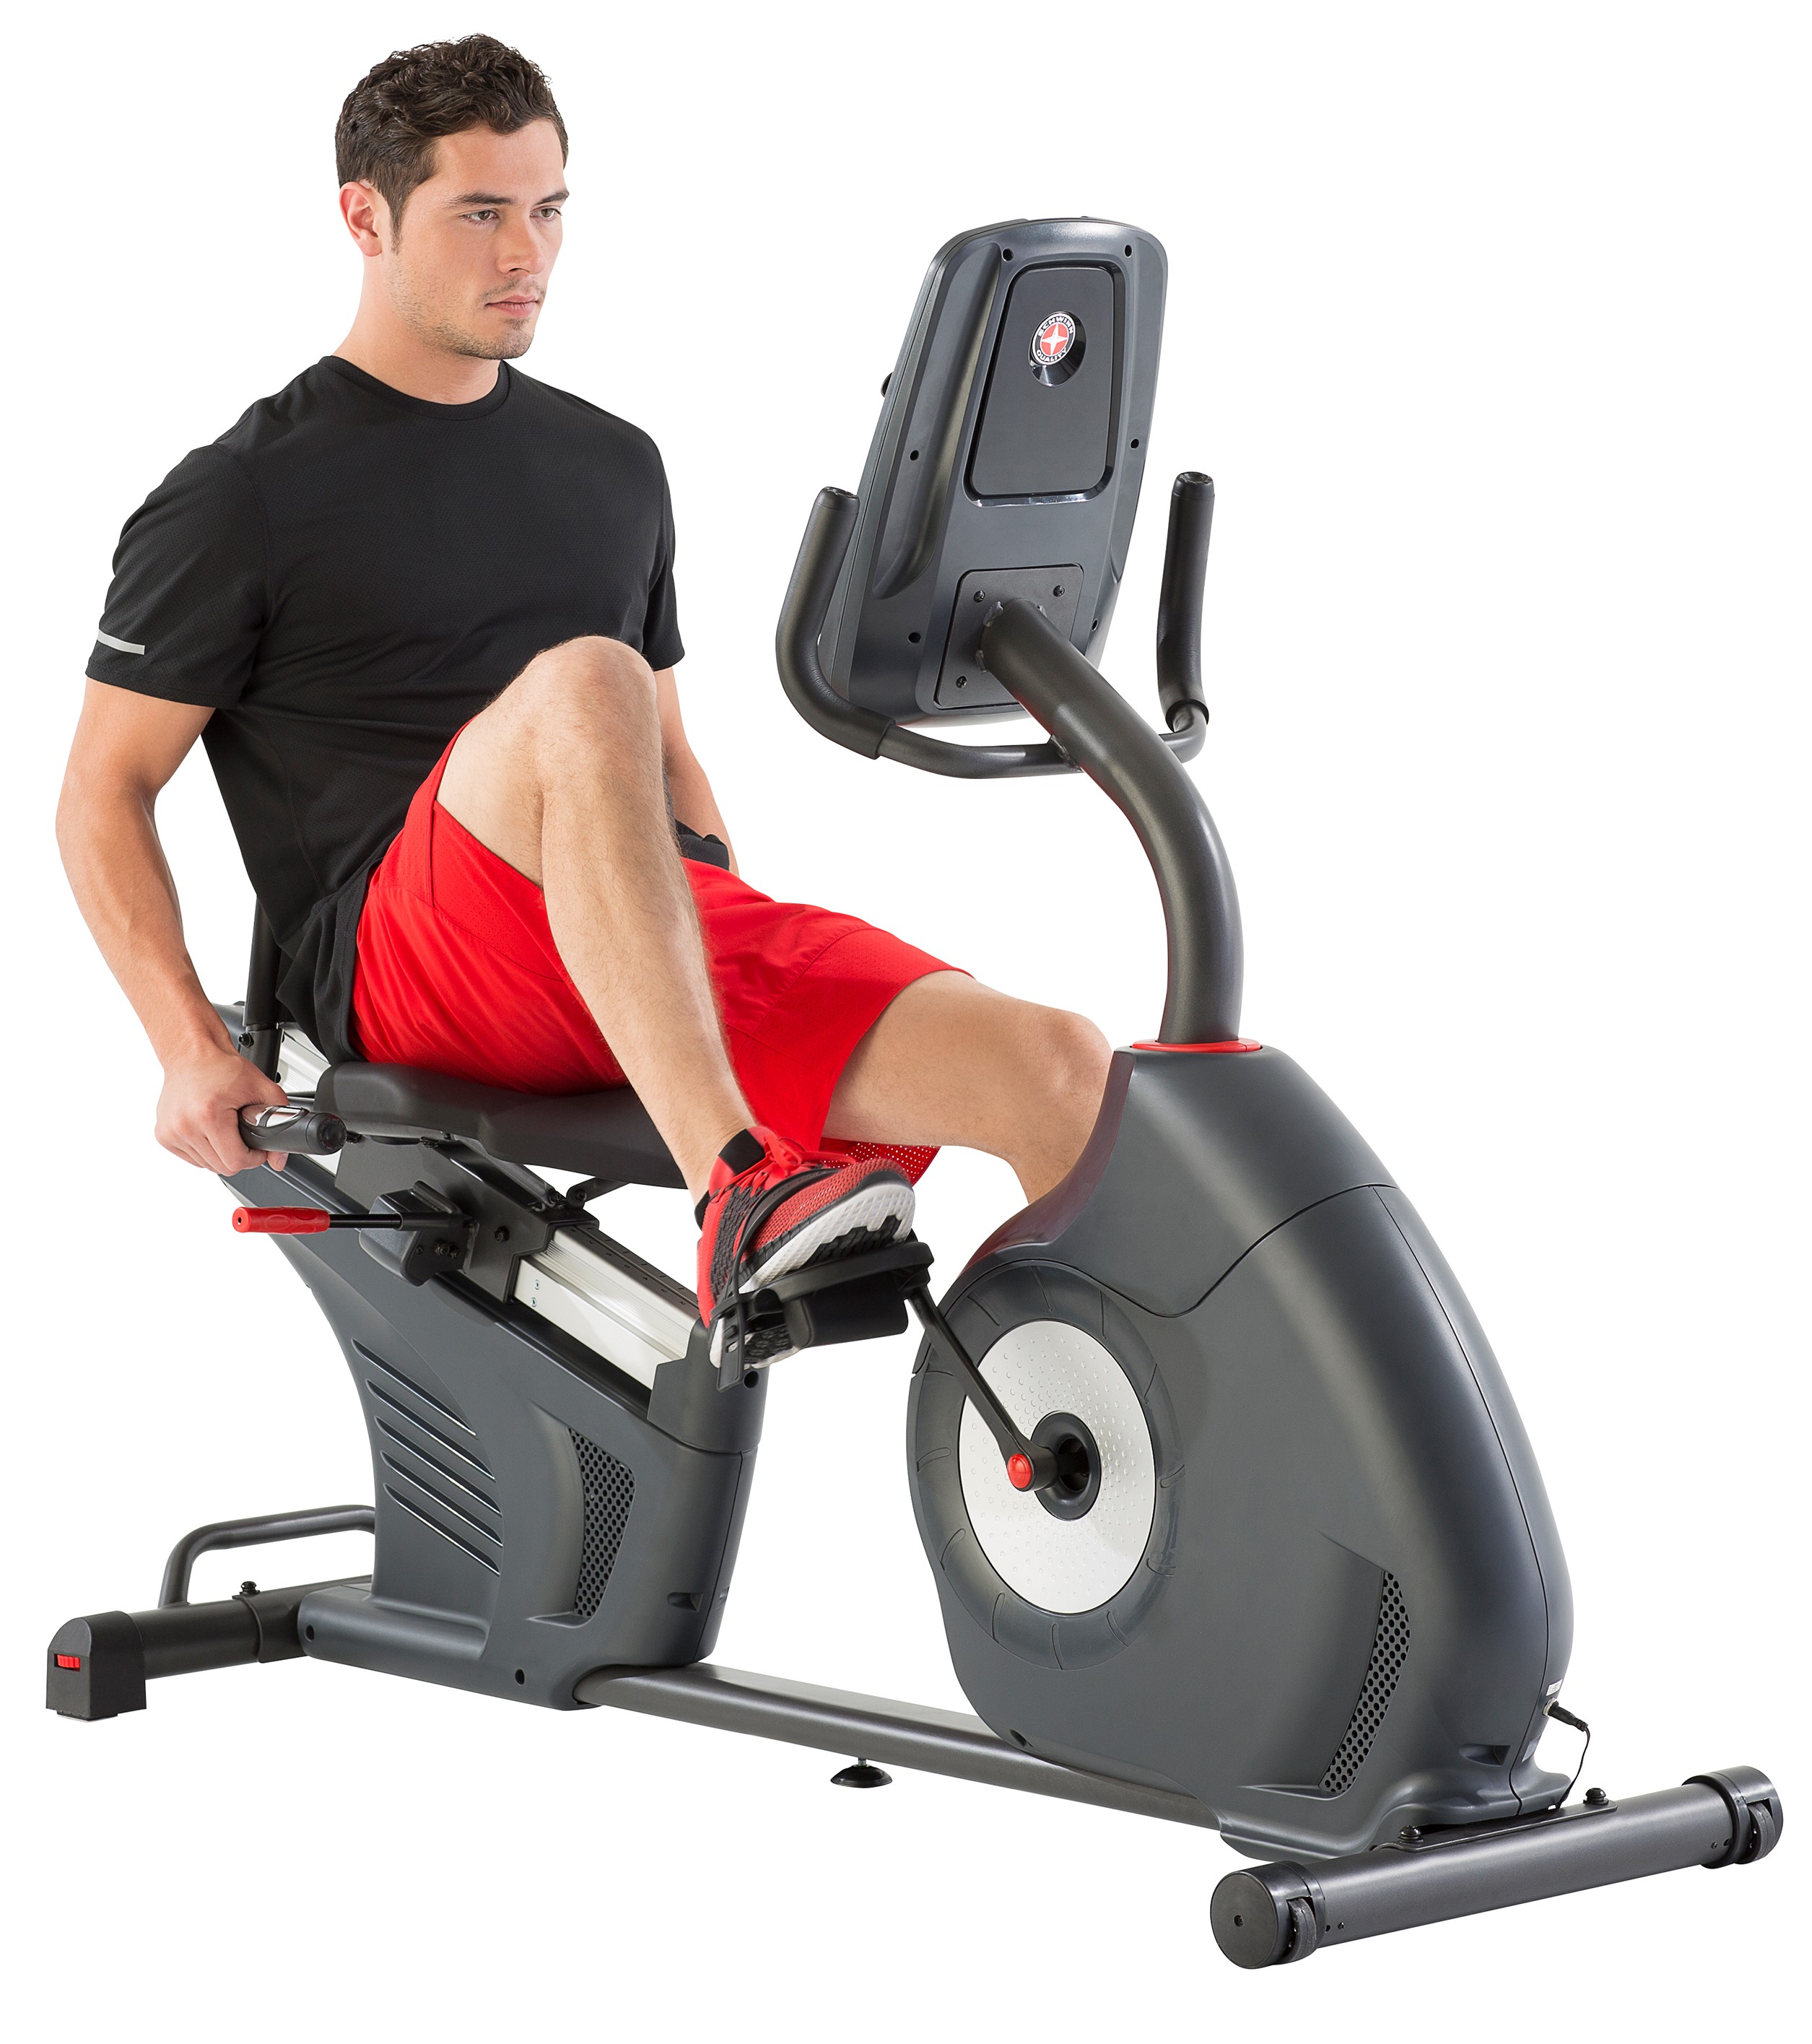 Schwinn 270 Recumbent Exercise Bike with Explore the World Compatibility - image 1 of 14